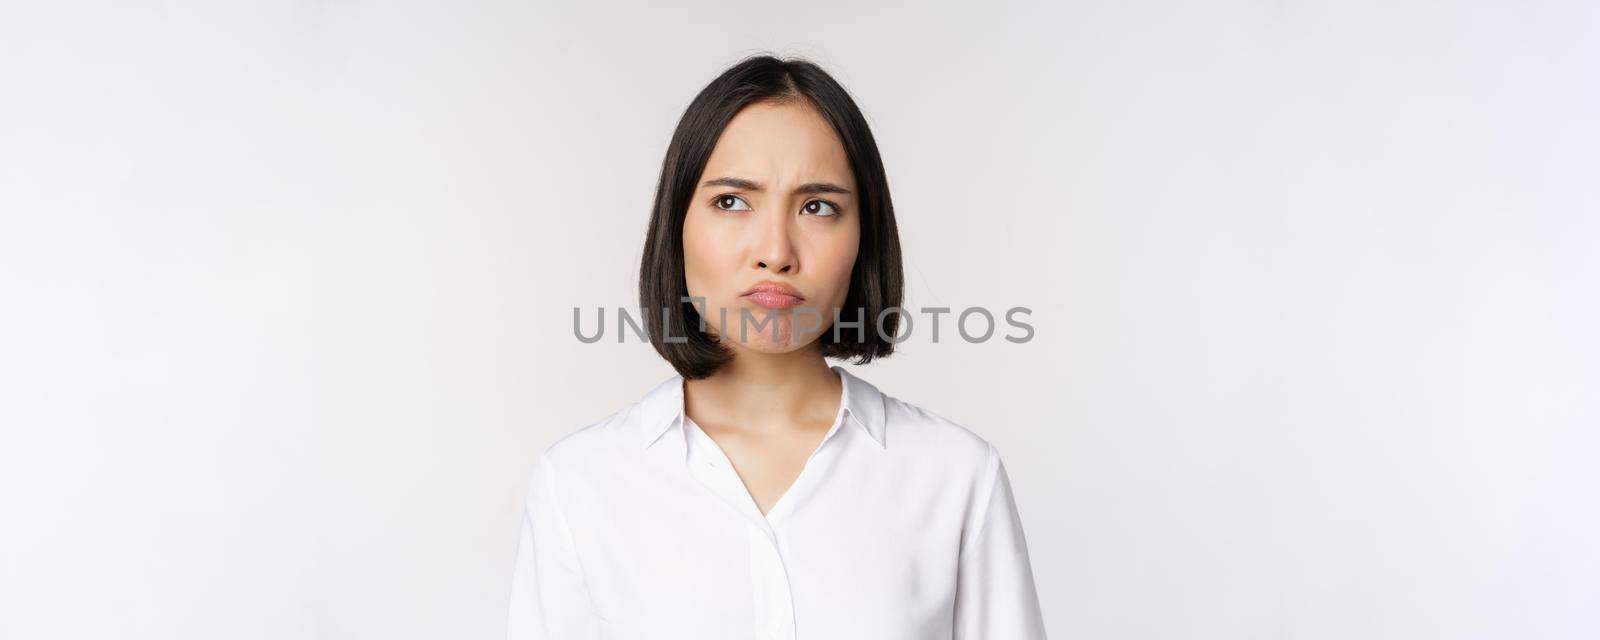 Close up head portrait of young asian woman looking upset and disappointed at left copy space, grimacing and frowning displeased, white background.